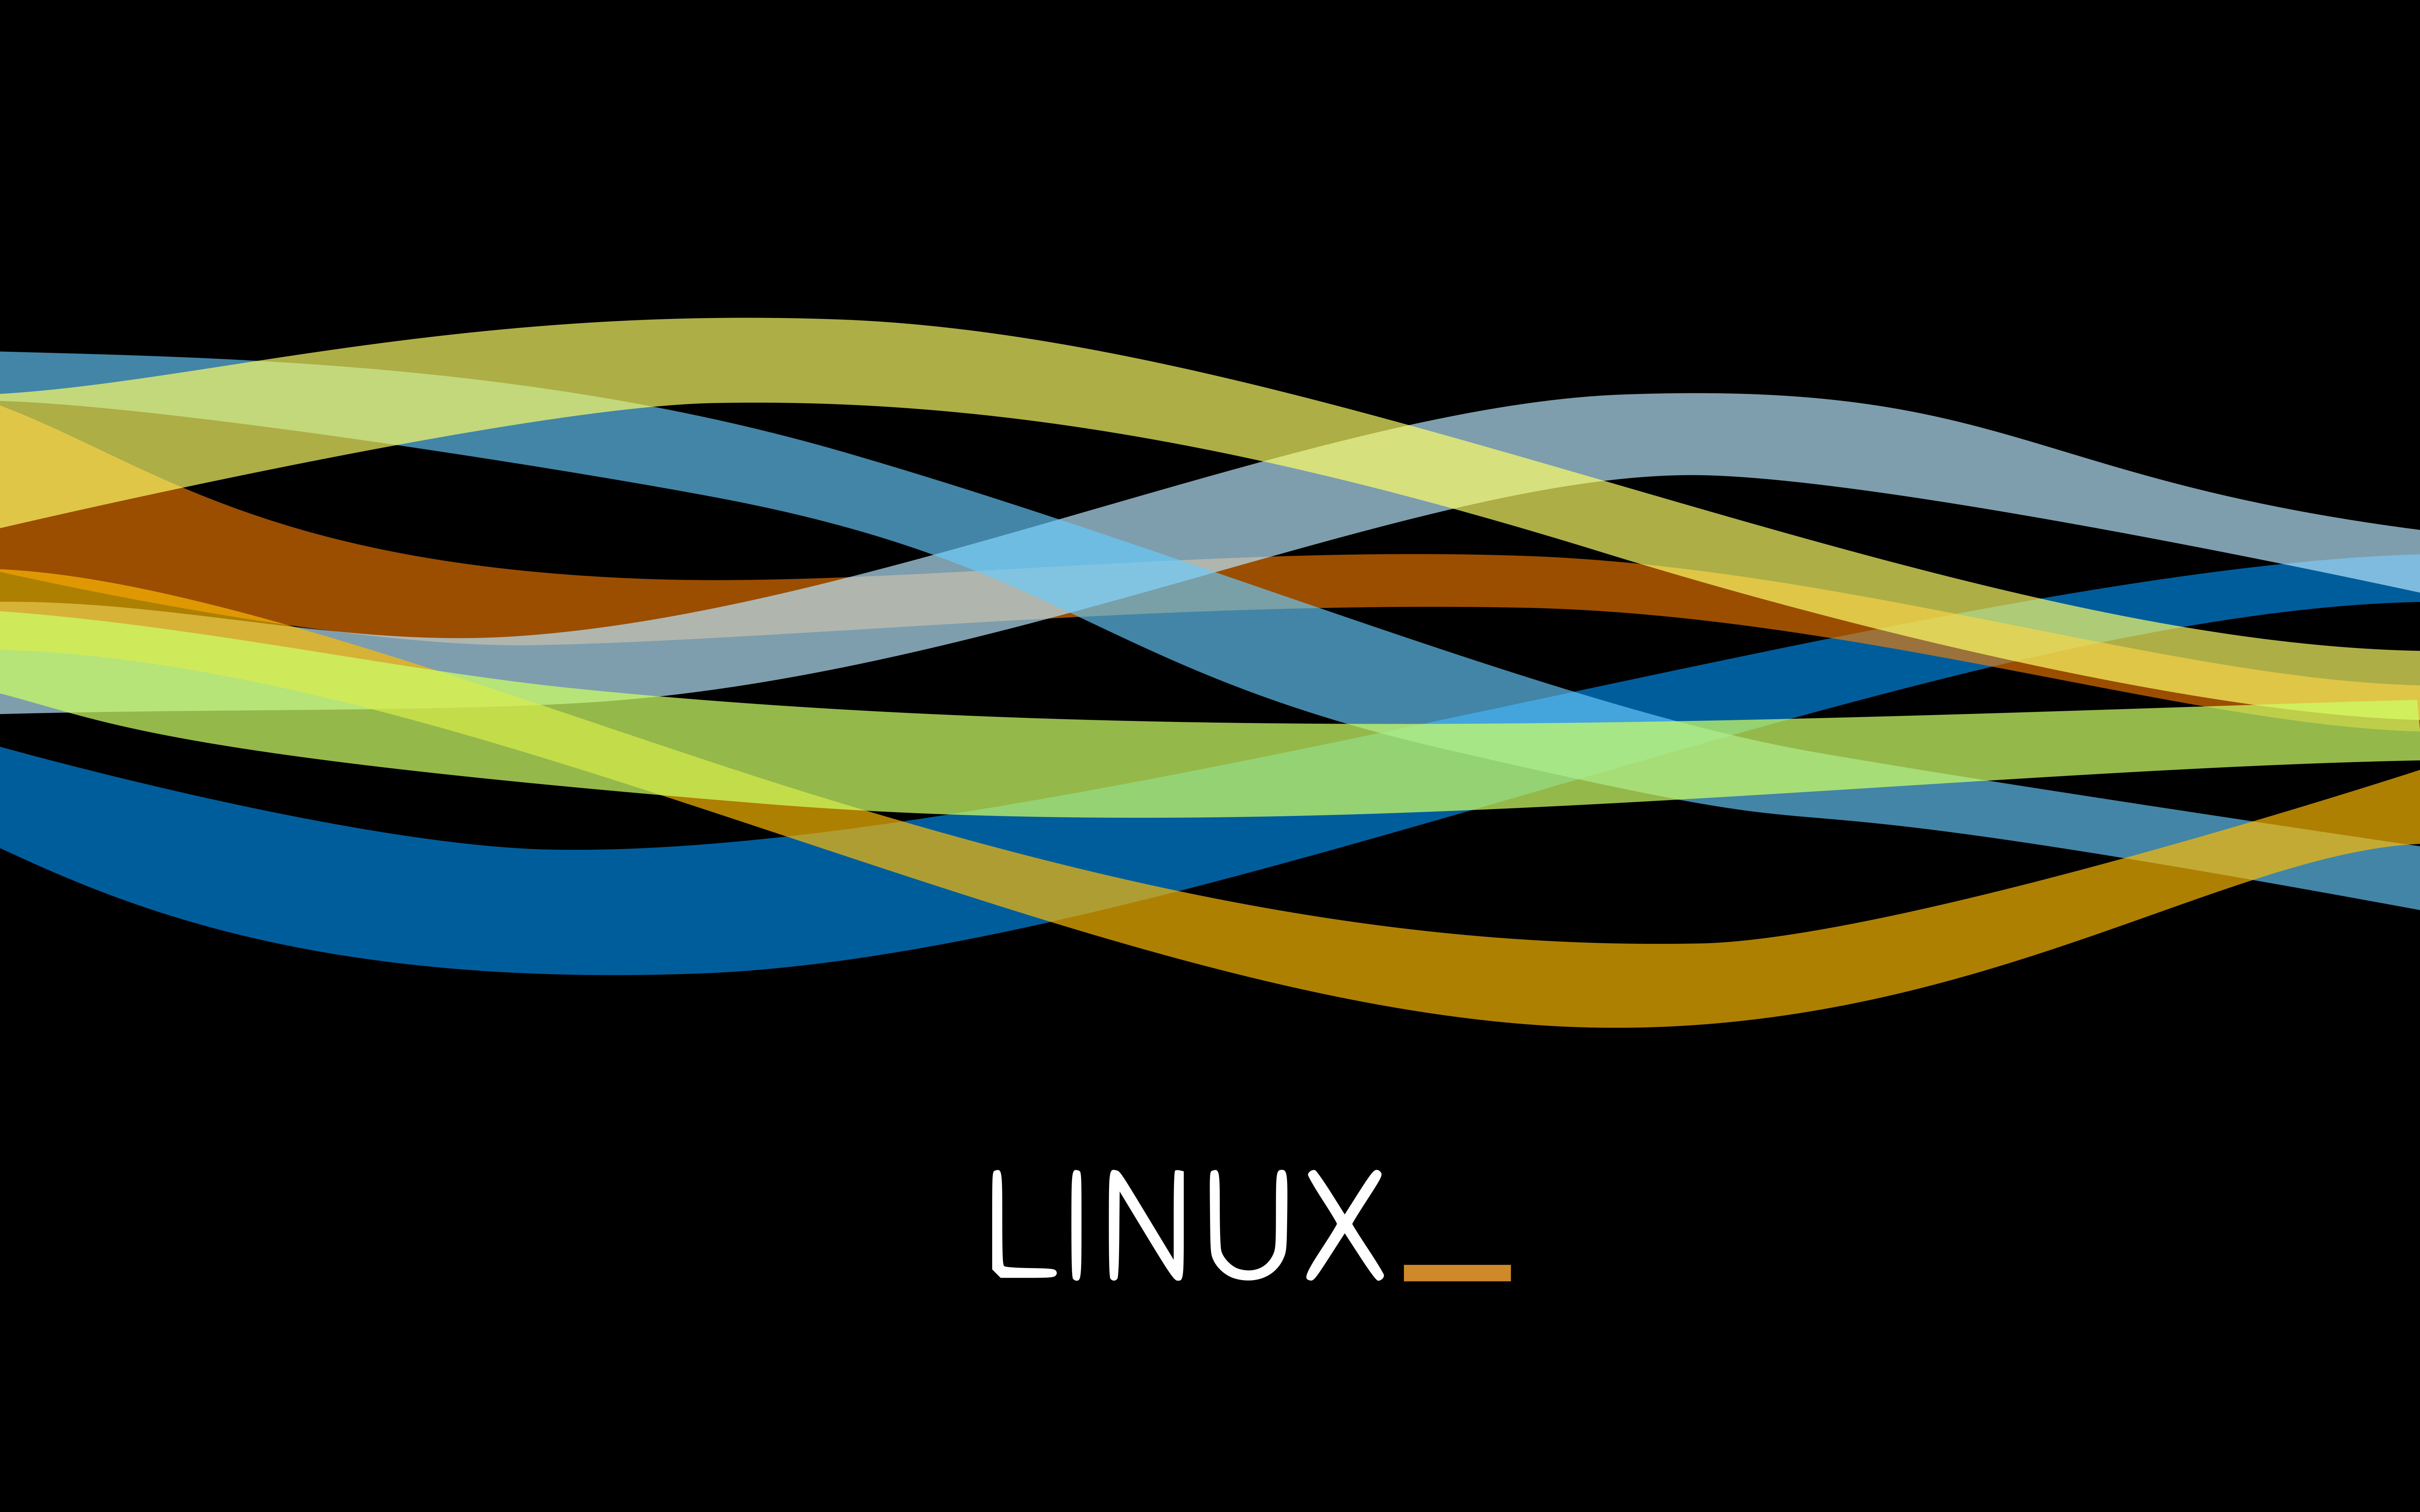 Abstract Linux Wallpapers Top Free Abstract Linux Backgrounds Wallpaperaccess